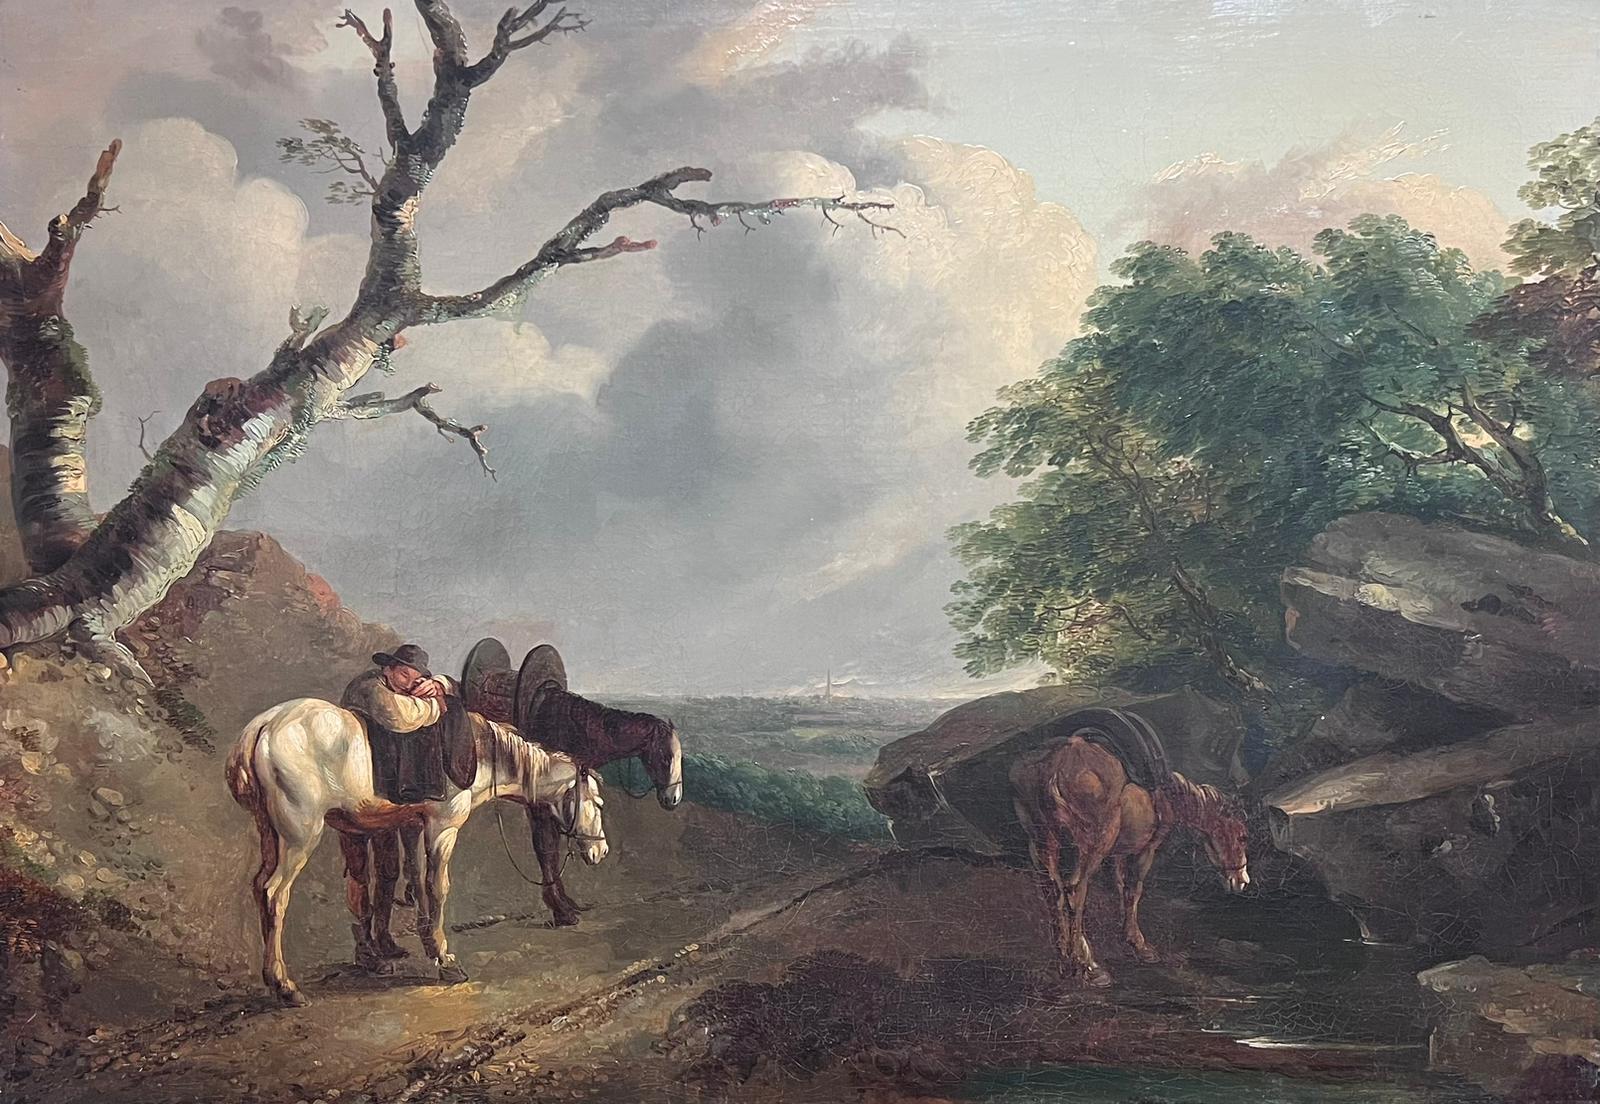 Großes englisches Ölgemälde „Man with Horses Resting“, Panoramic Country View, 1800er Jahre – Painting von Thomas Barker of Bath